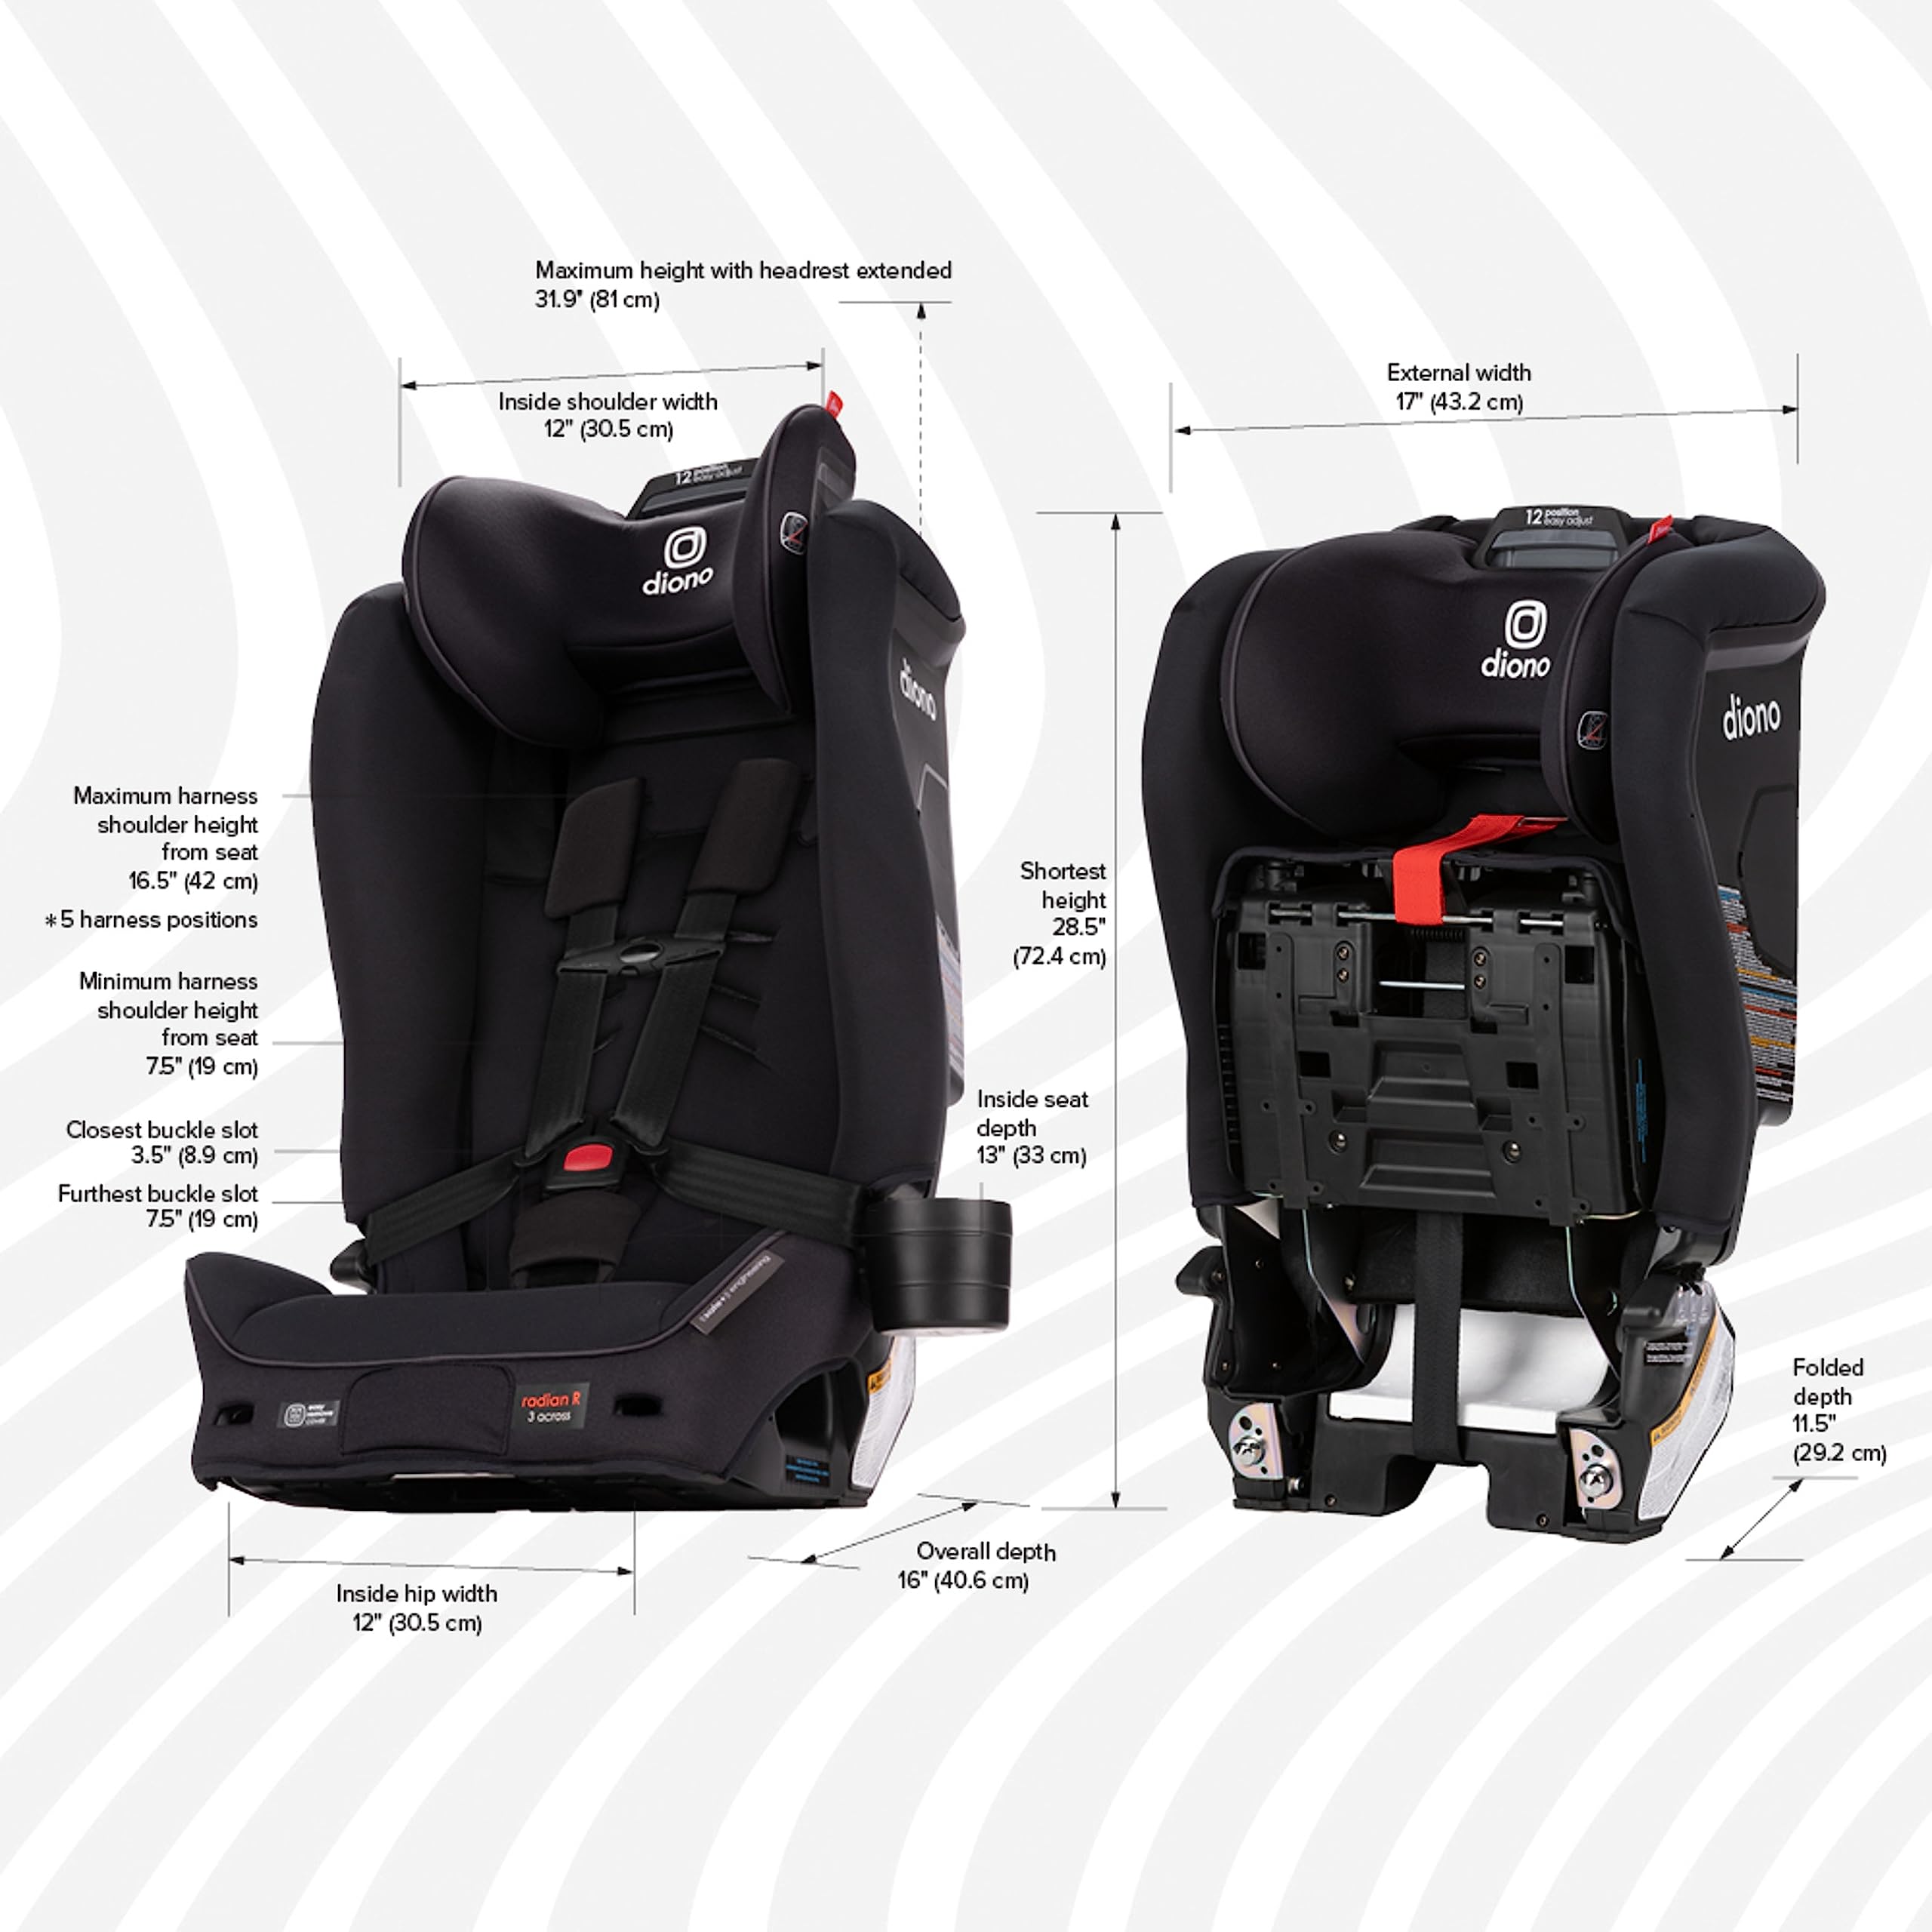 Diono Radian 3R SafePlus, All-in-One Convertible Car Seat, Rear and Forward Facing, SafePlus Engineering, 10 Years 1 Car Seat, Slim Fit 3 Across, Black Jet